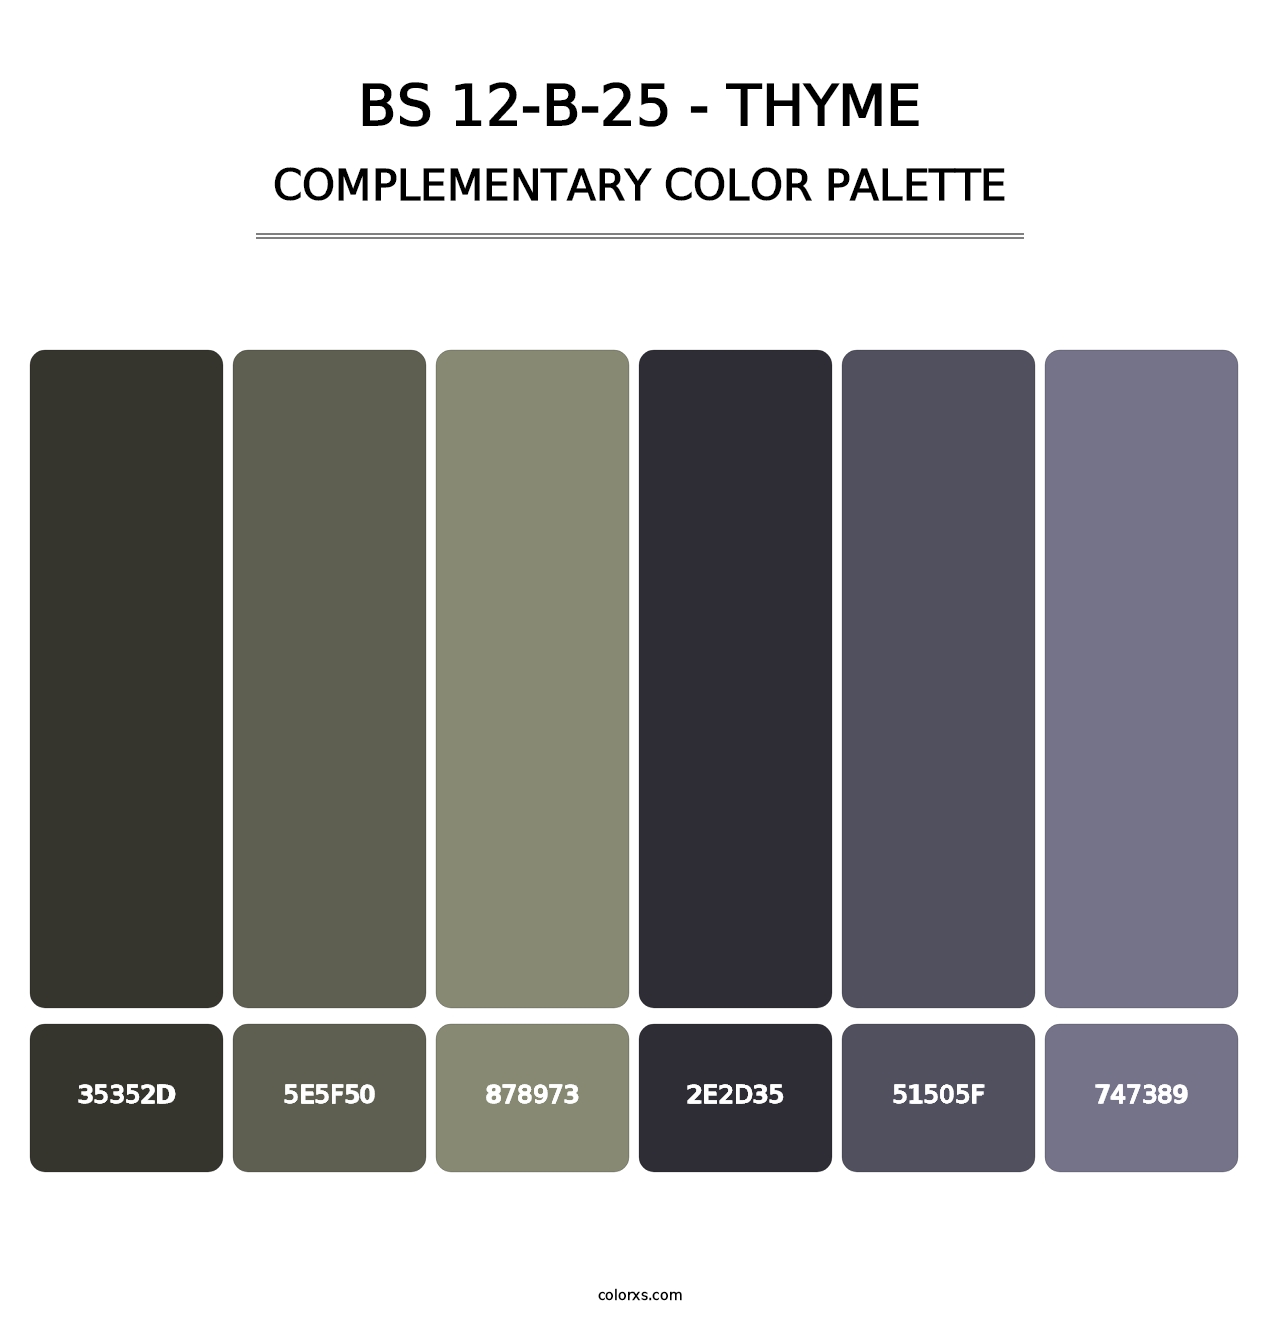 BS 12-B-25 - Thyme - Complementary Color Palette